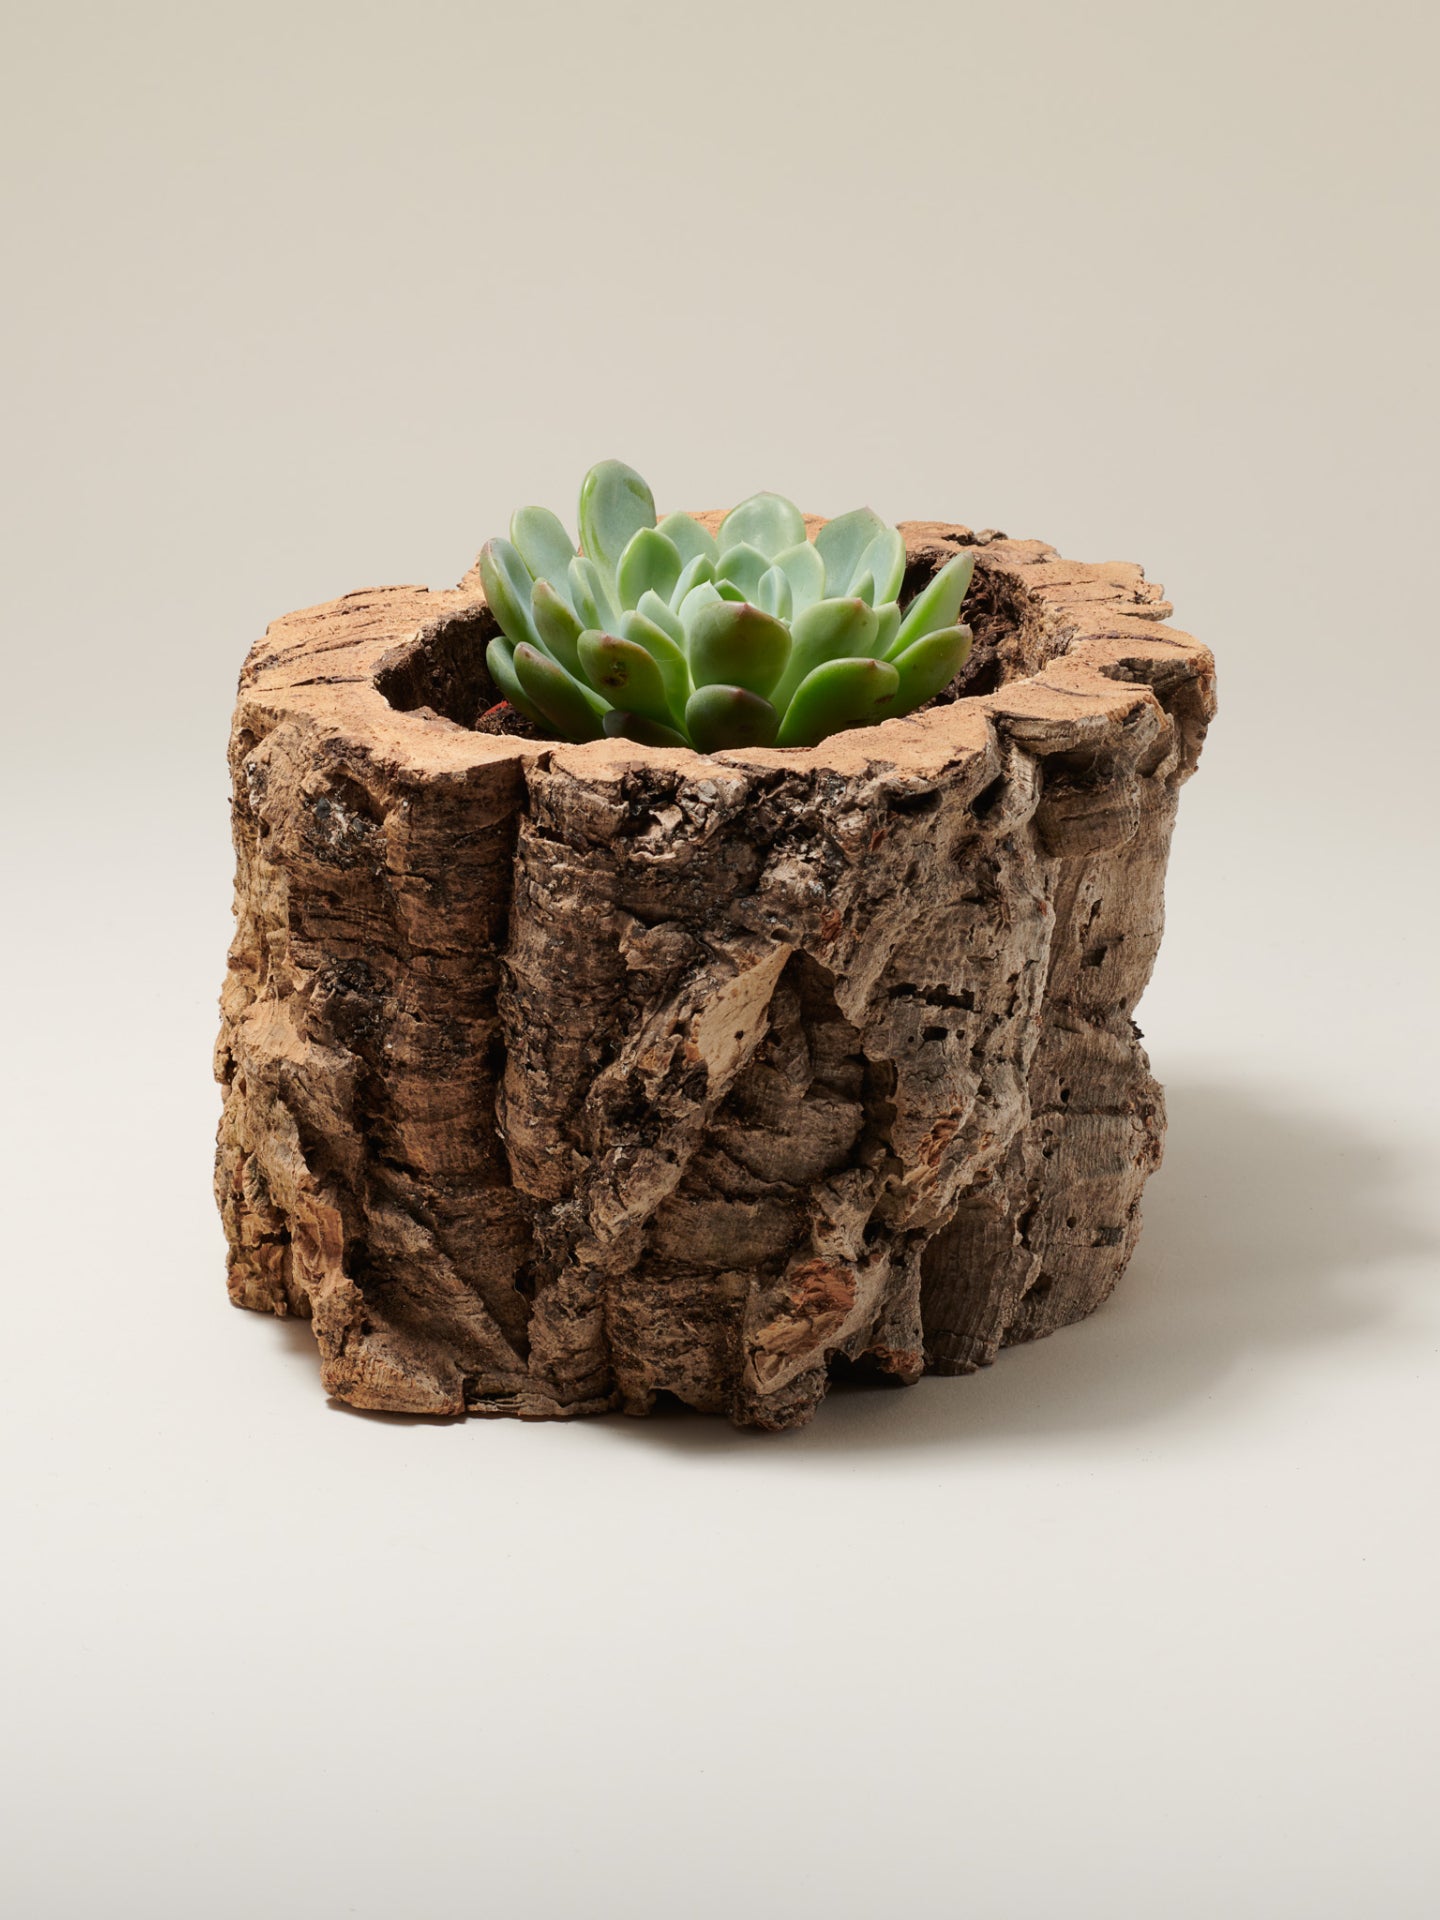 Eco Friendly Sustainable Hypoallergenic Decorative Natural Cork